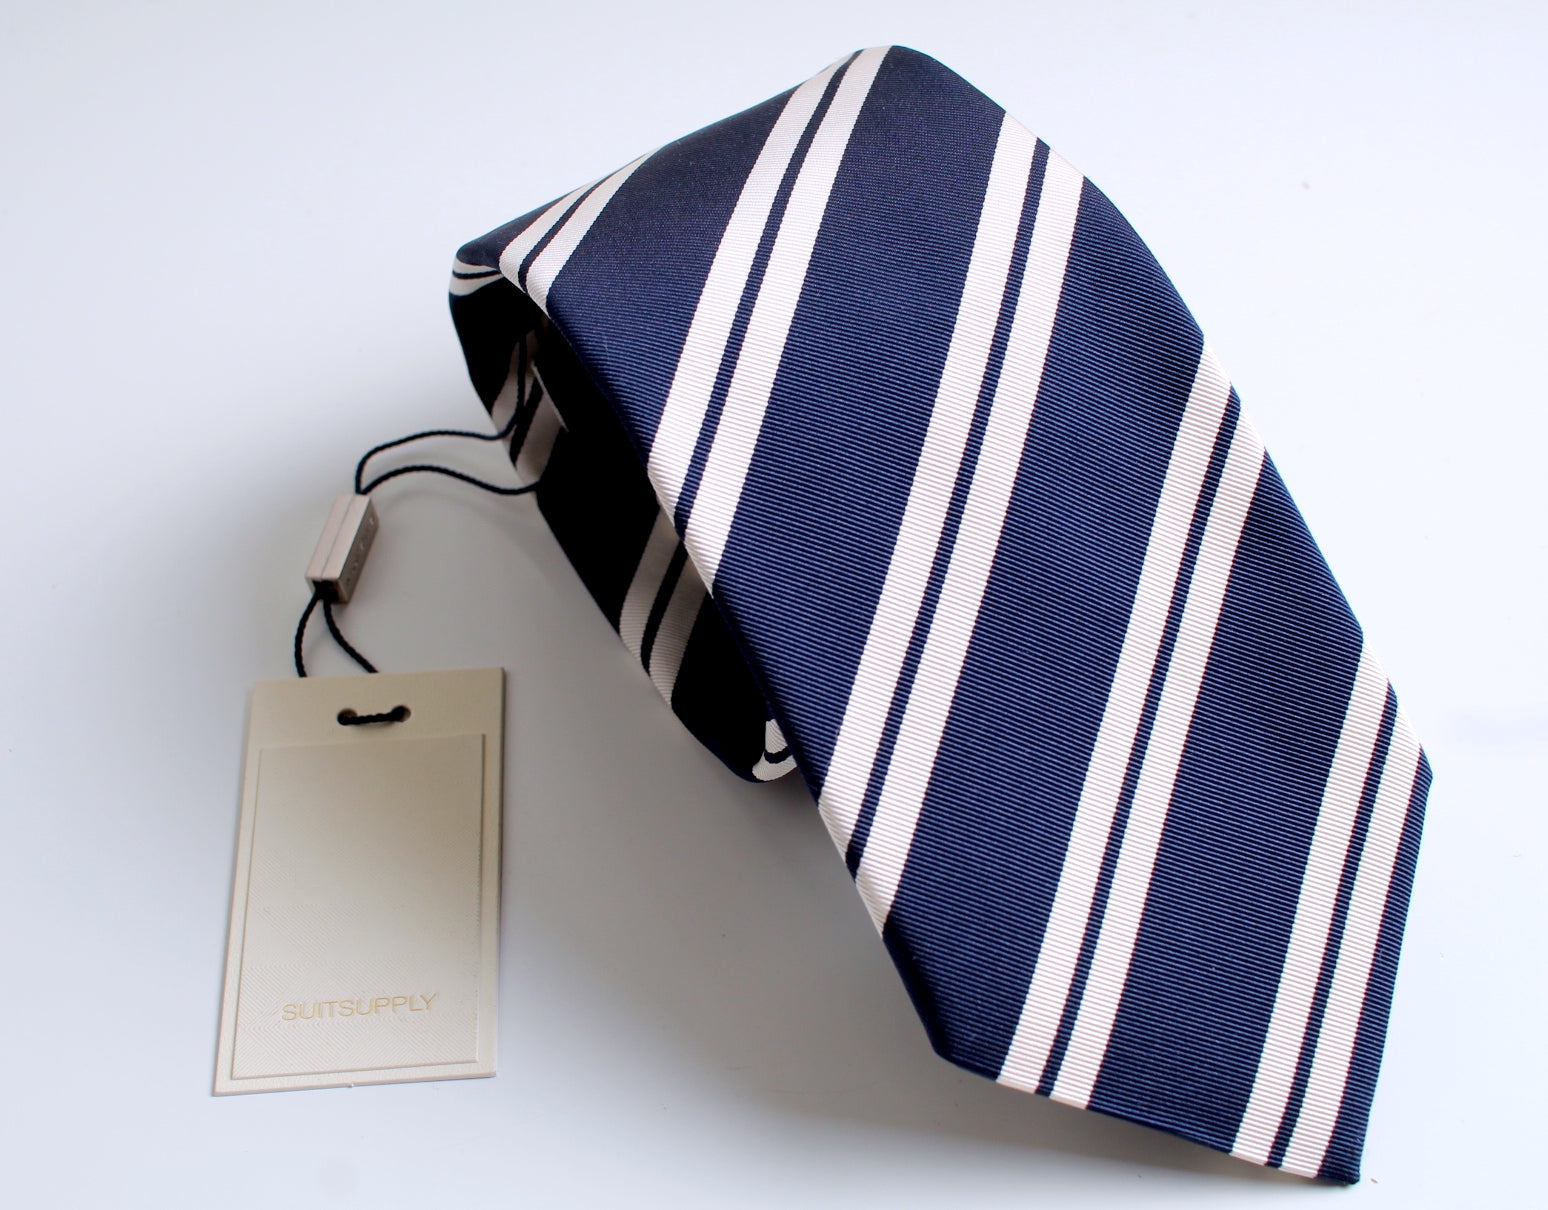 New SUITSUPPLY Navy Stripe Silk and Cotton Tie